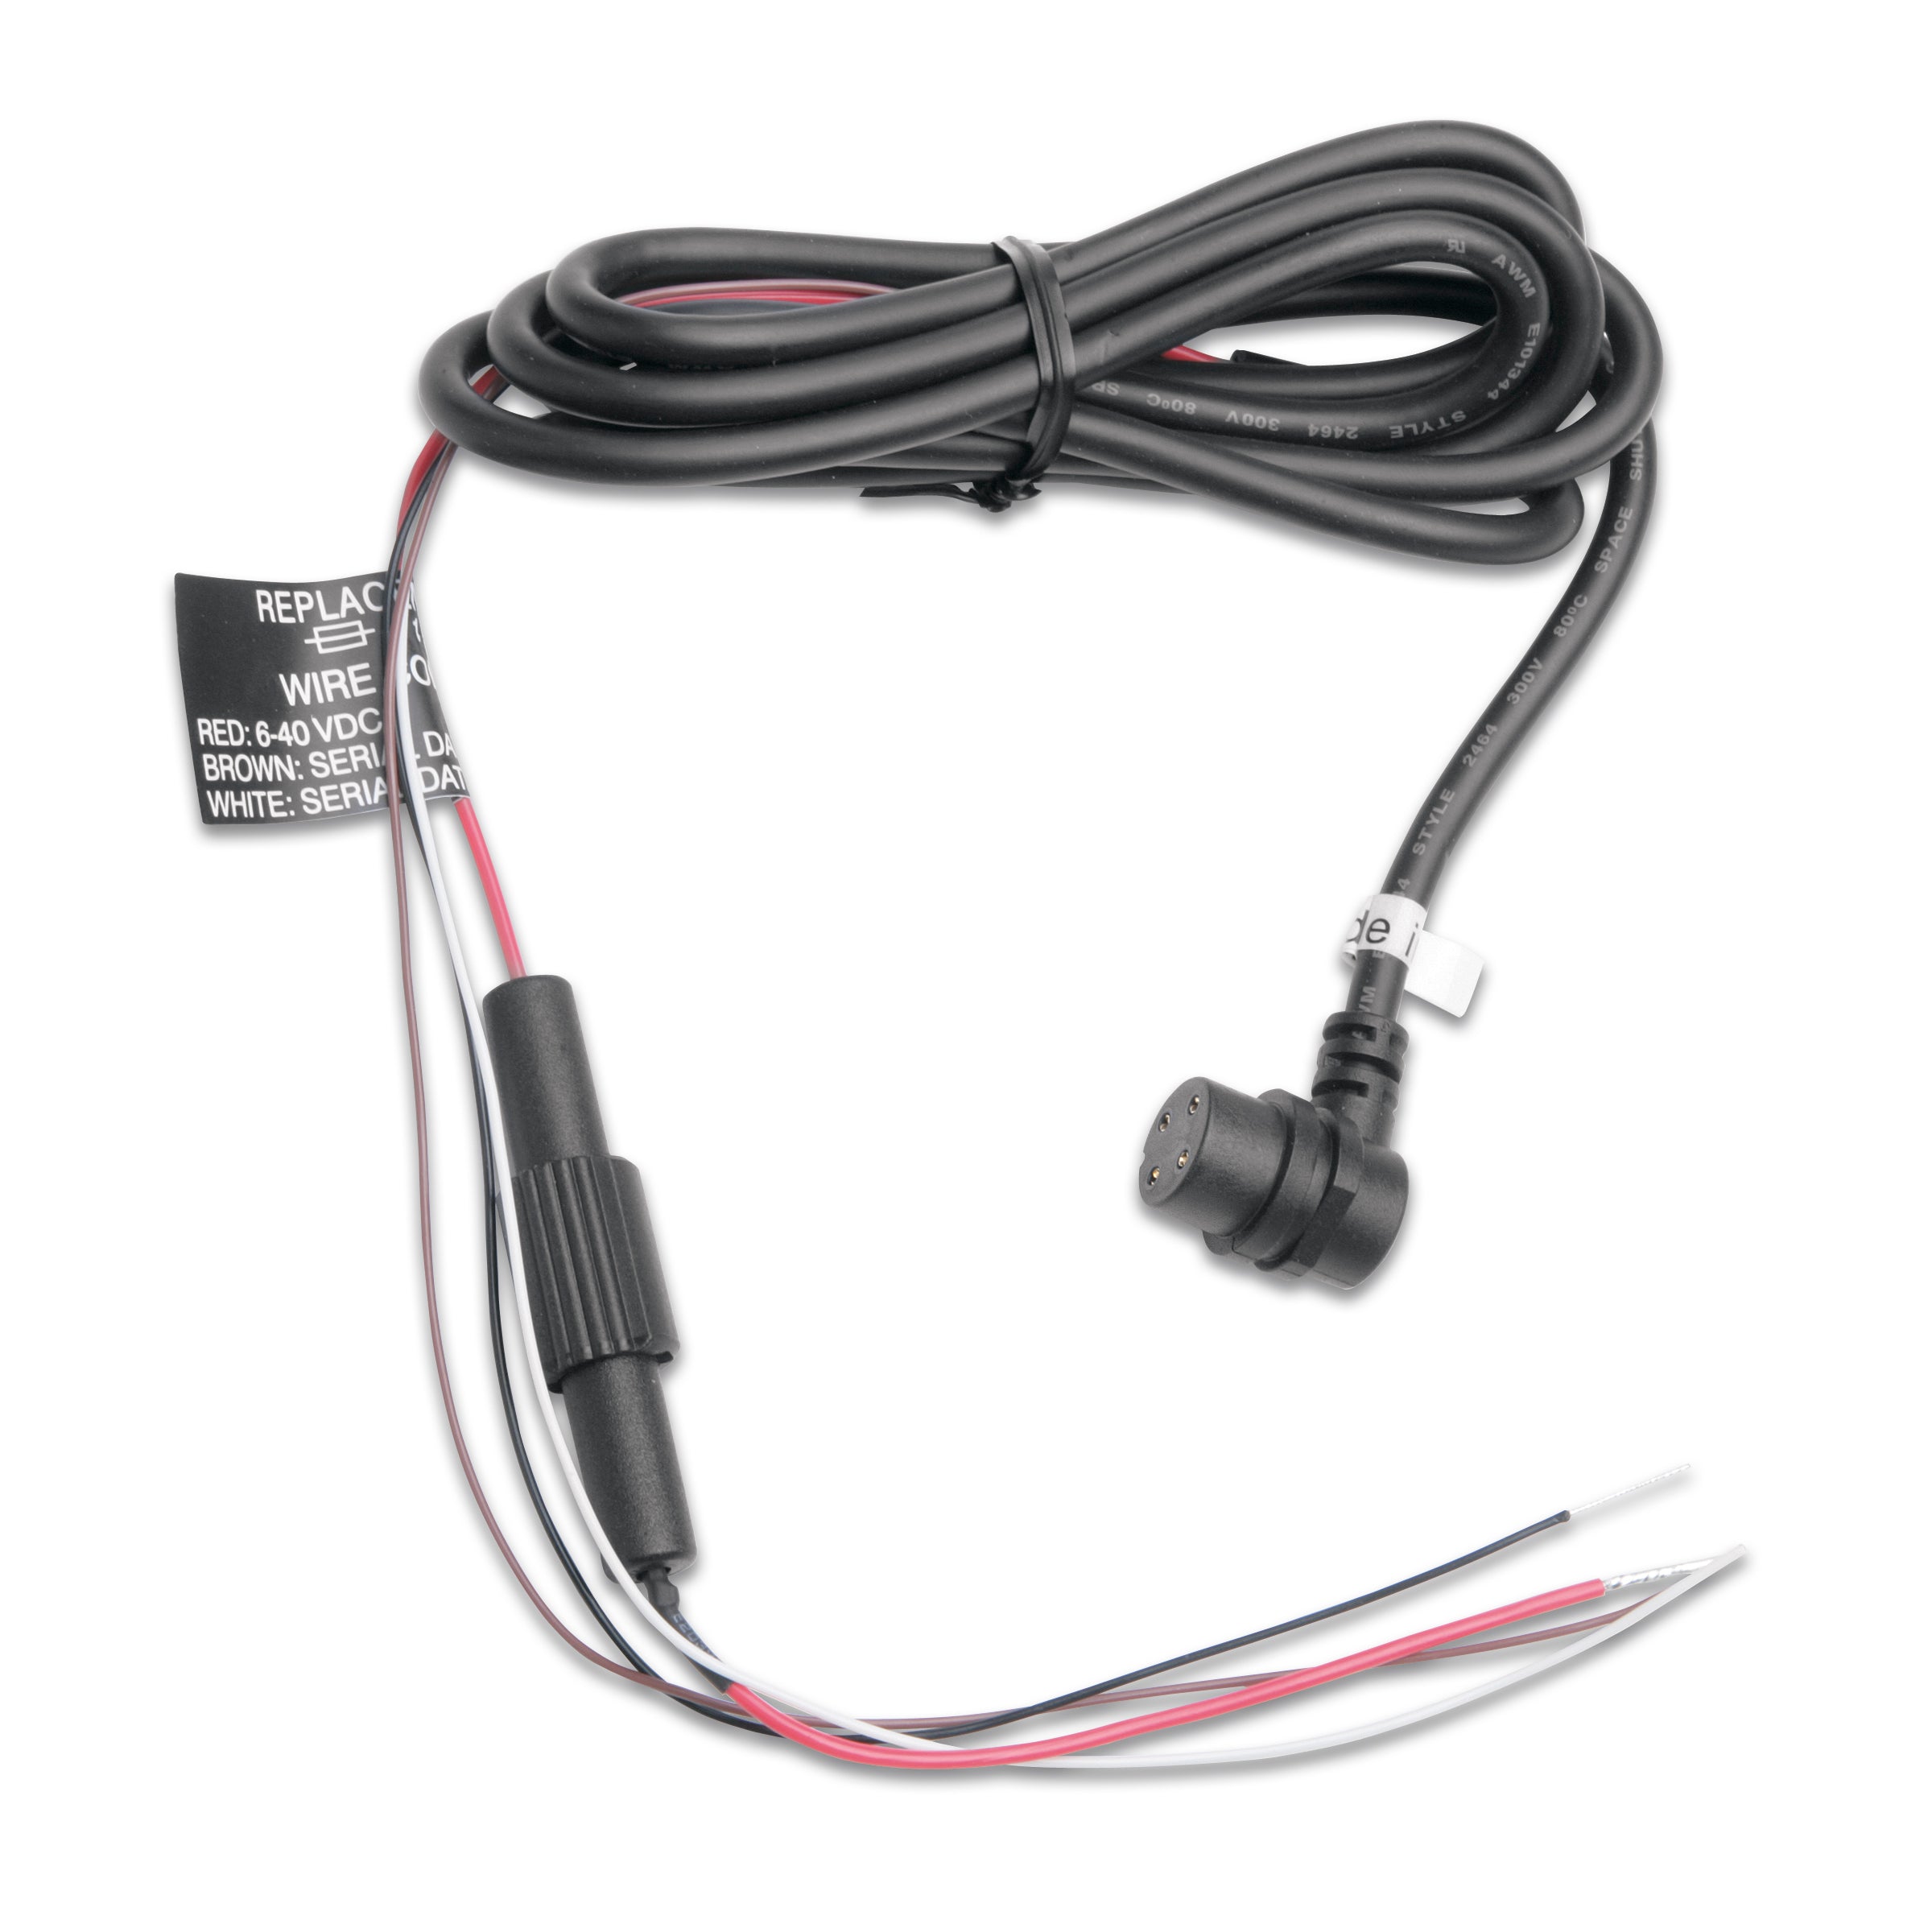 Garmin Power/Data Cable (Striped Ends)